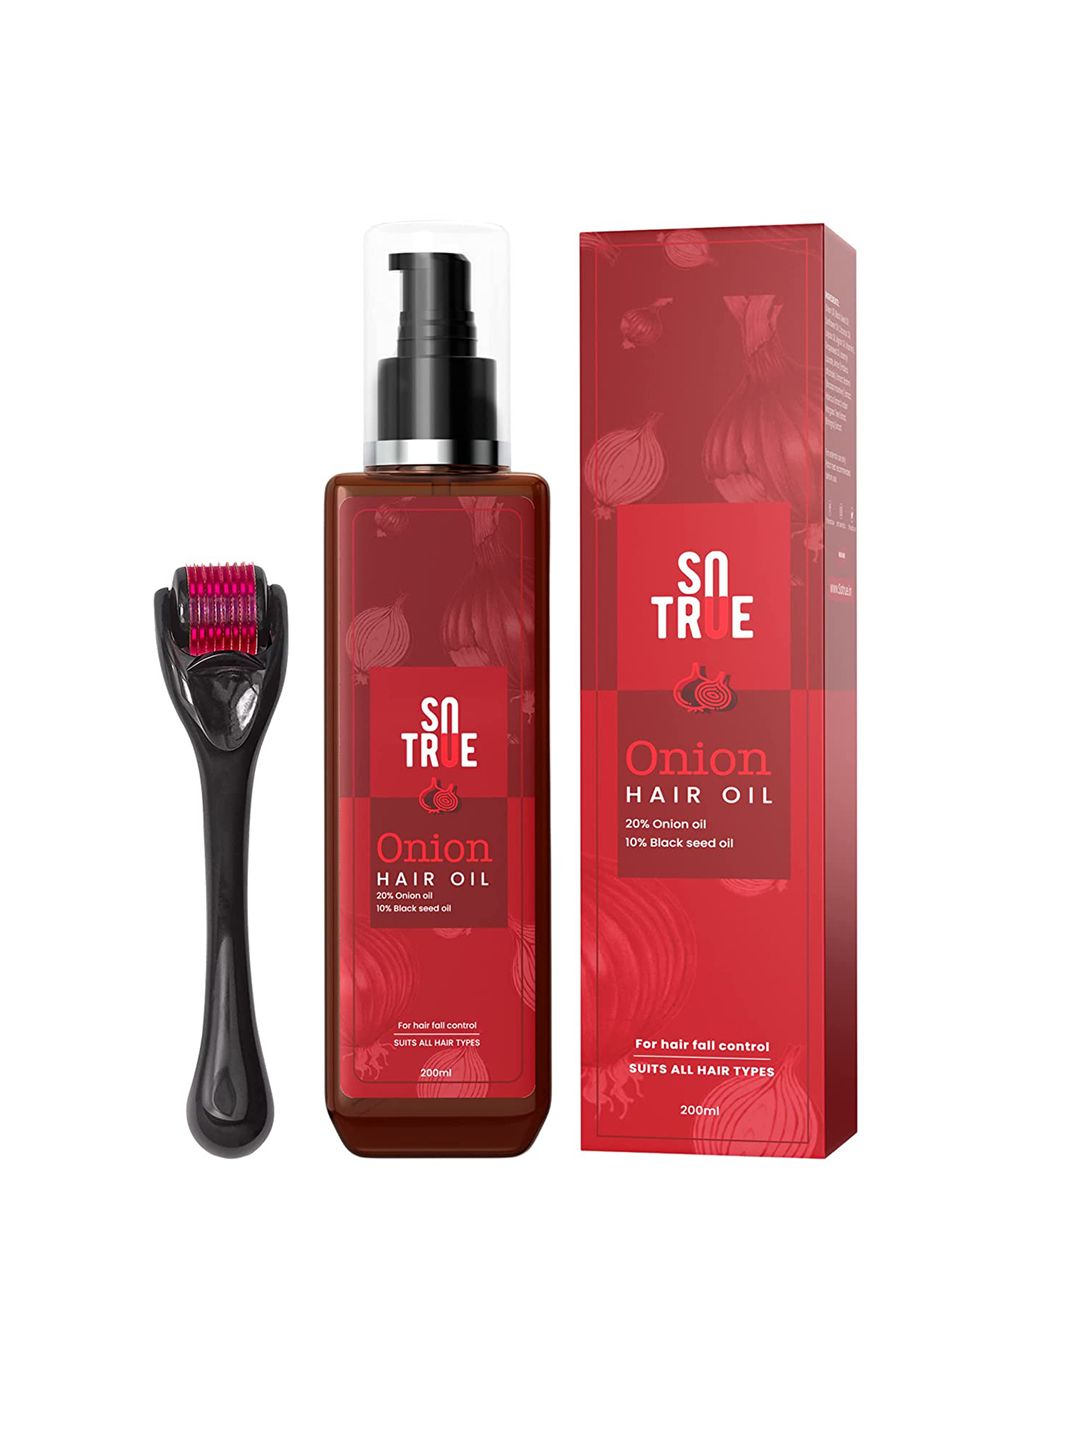 SOTRUE Onion Hair Oil with Derma Roller 200 ml Price in India